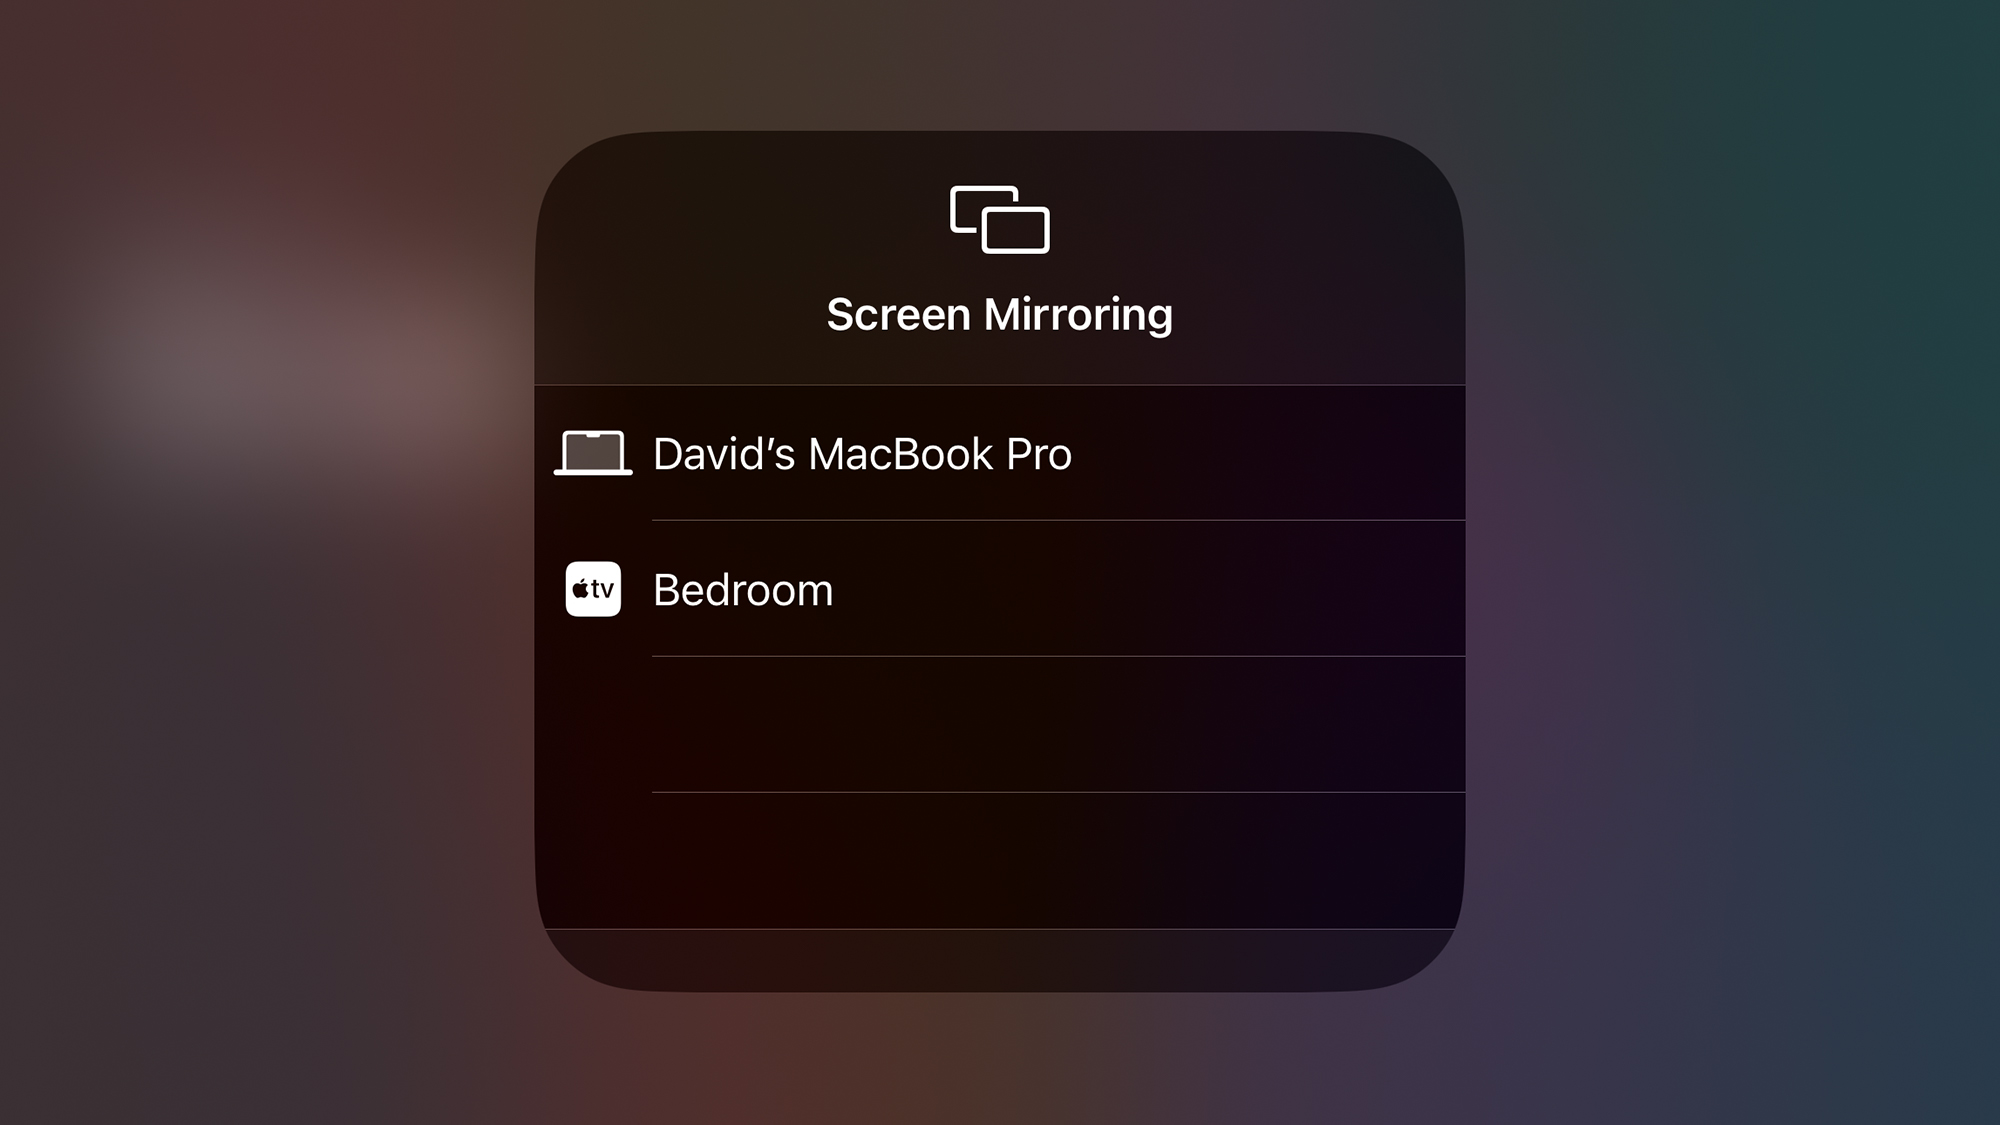 The screen mirroring option on an Apple TV 4K when used with an iPhone.